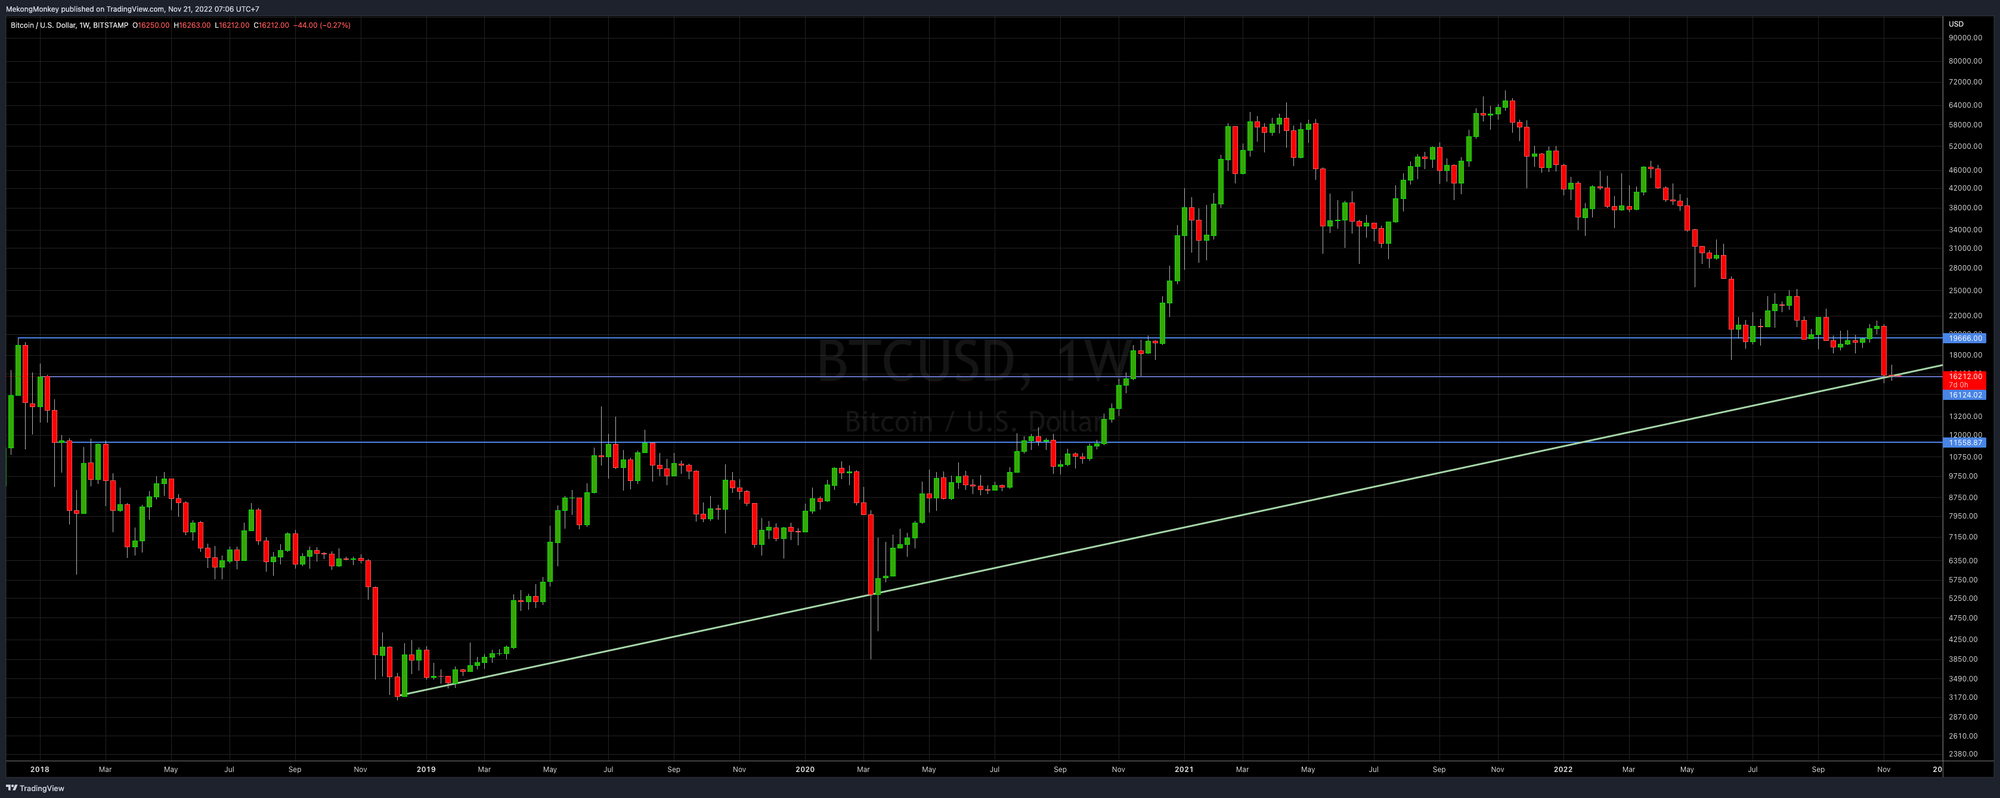 BTCUSD, weekly chart with HSR and trend line